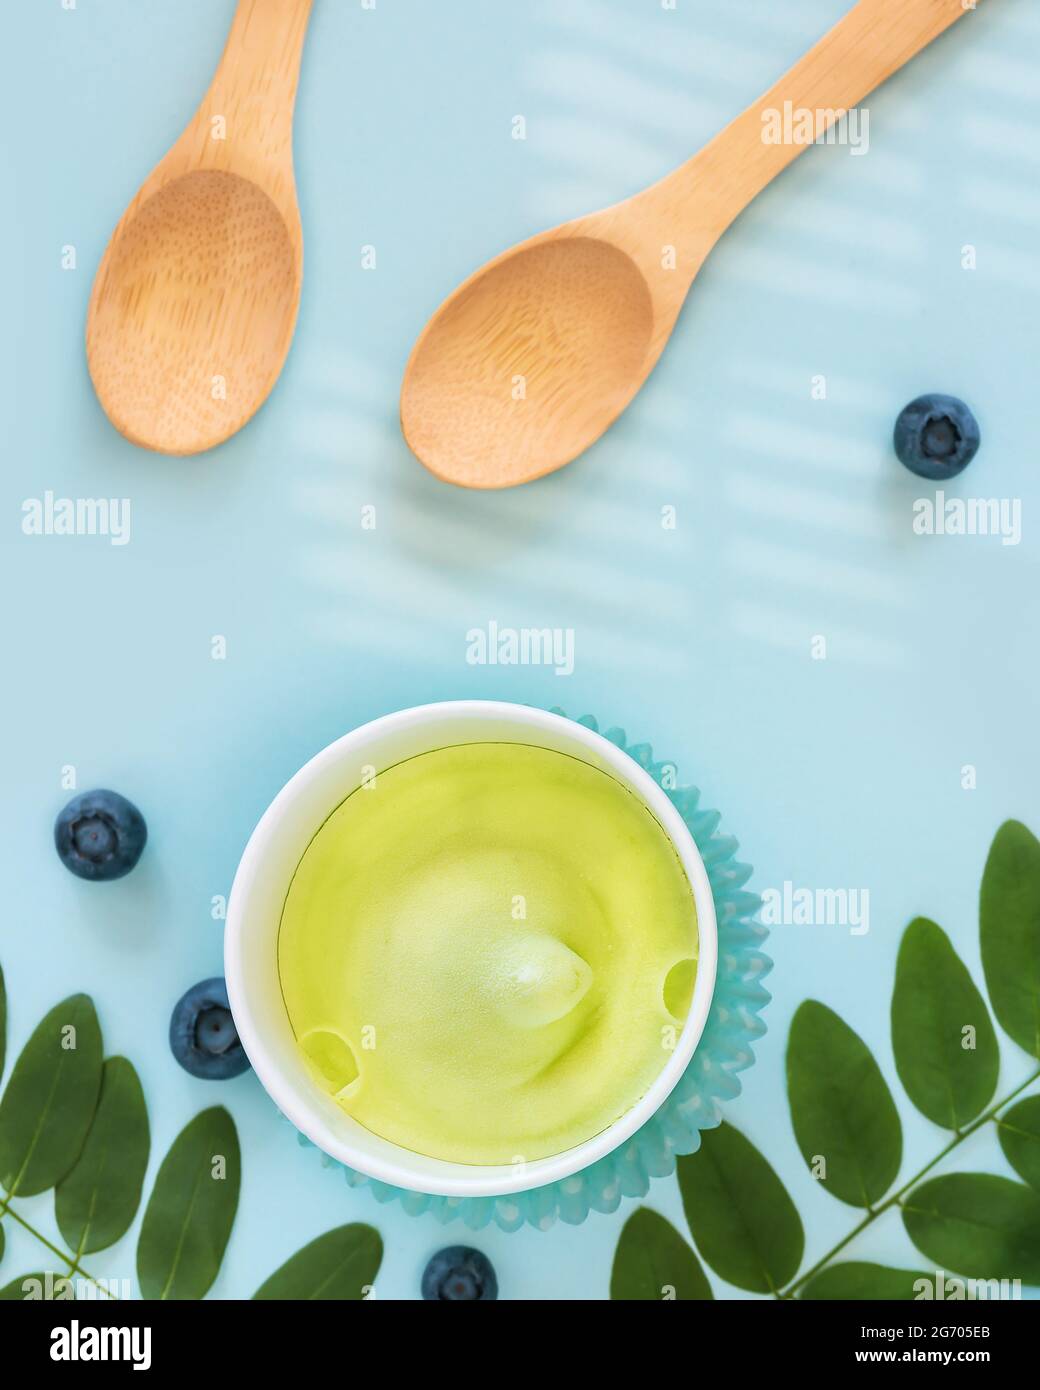 Summer, food composition with natural, vegan ice cream, blueberries, leaves and wooden spoons on a blue background. Eco friendly still life with fruit Stock Photo